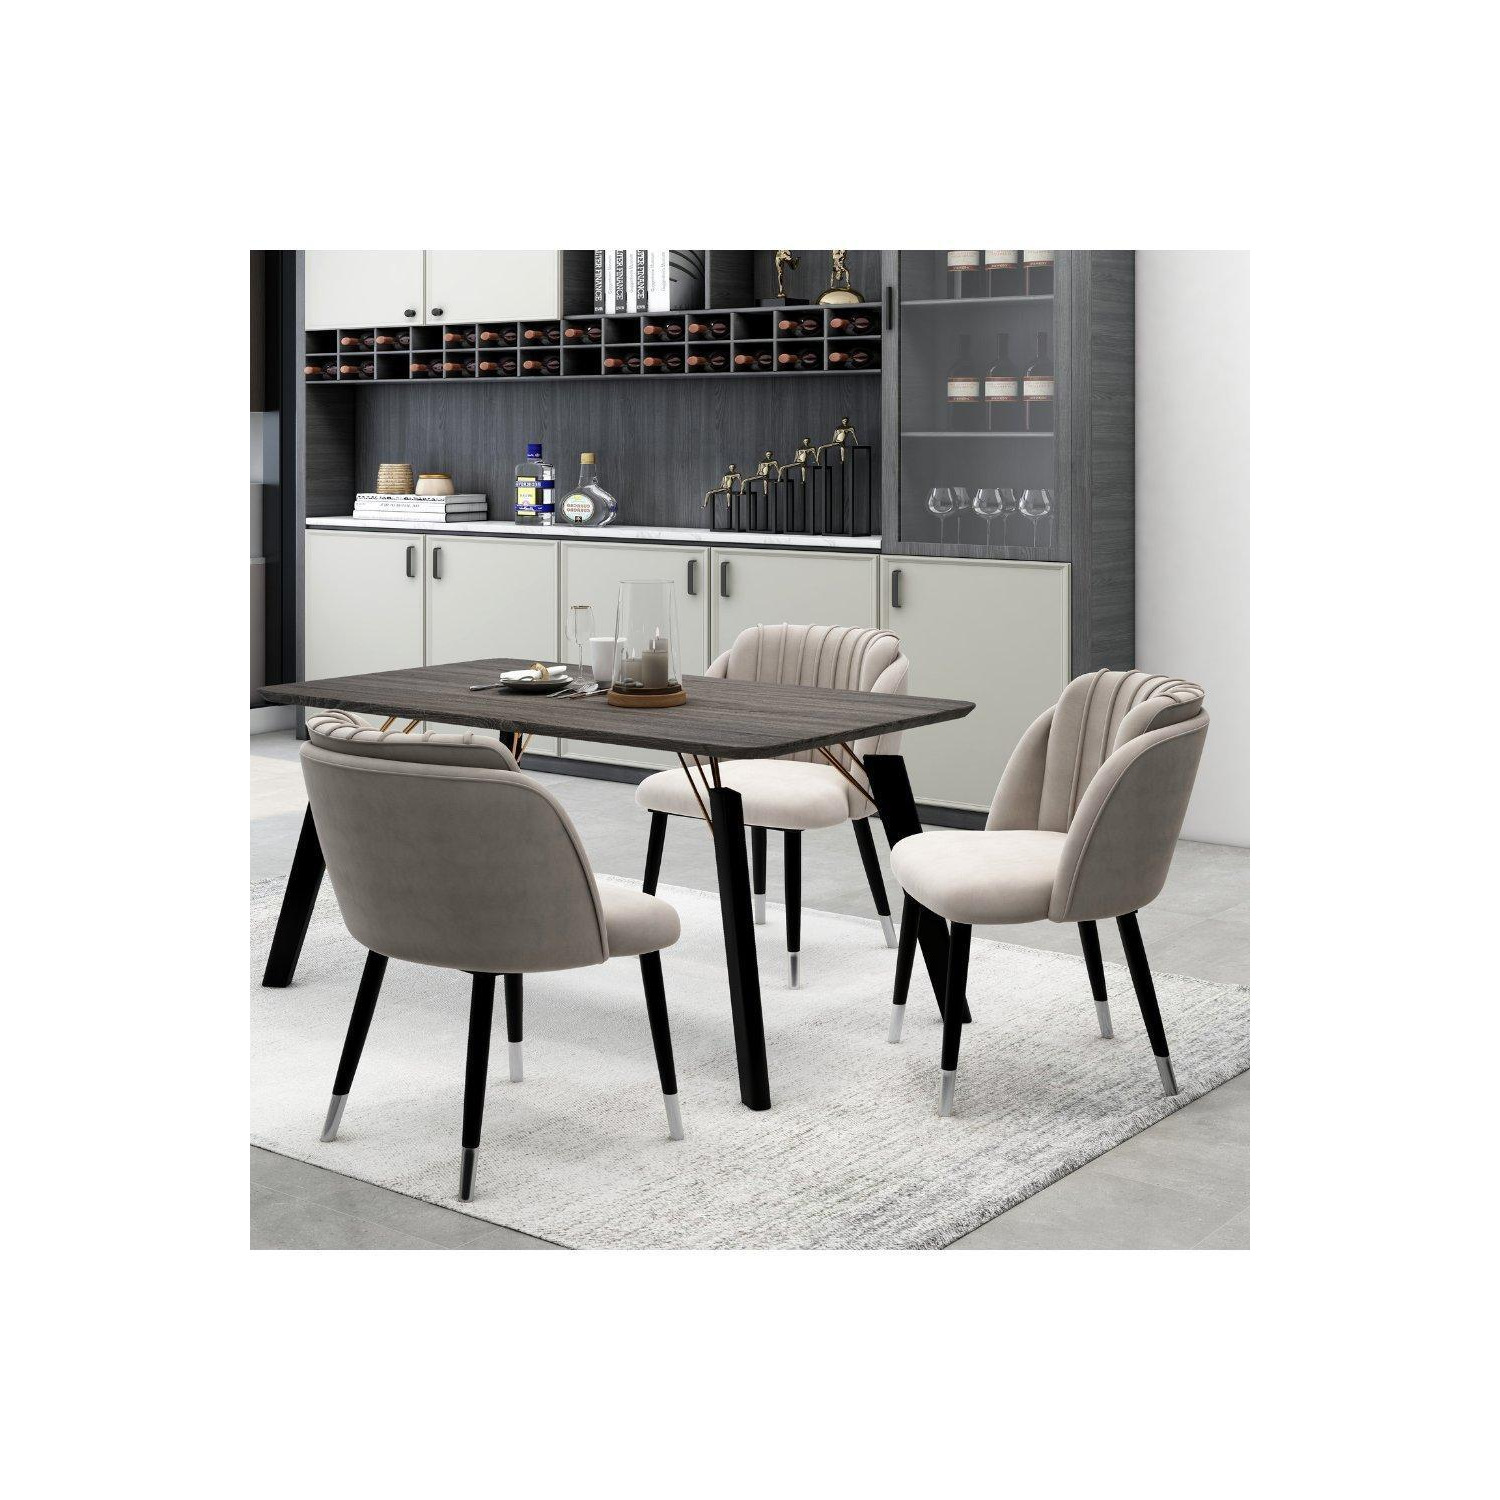 ''Milano Duke' Dining Set with an Brown Table and 6 Dining chairs - image 1